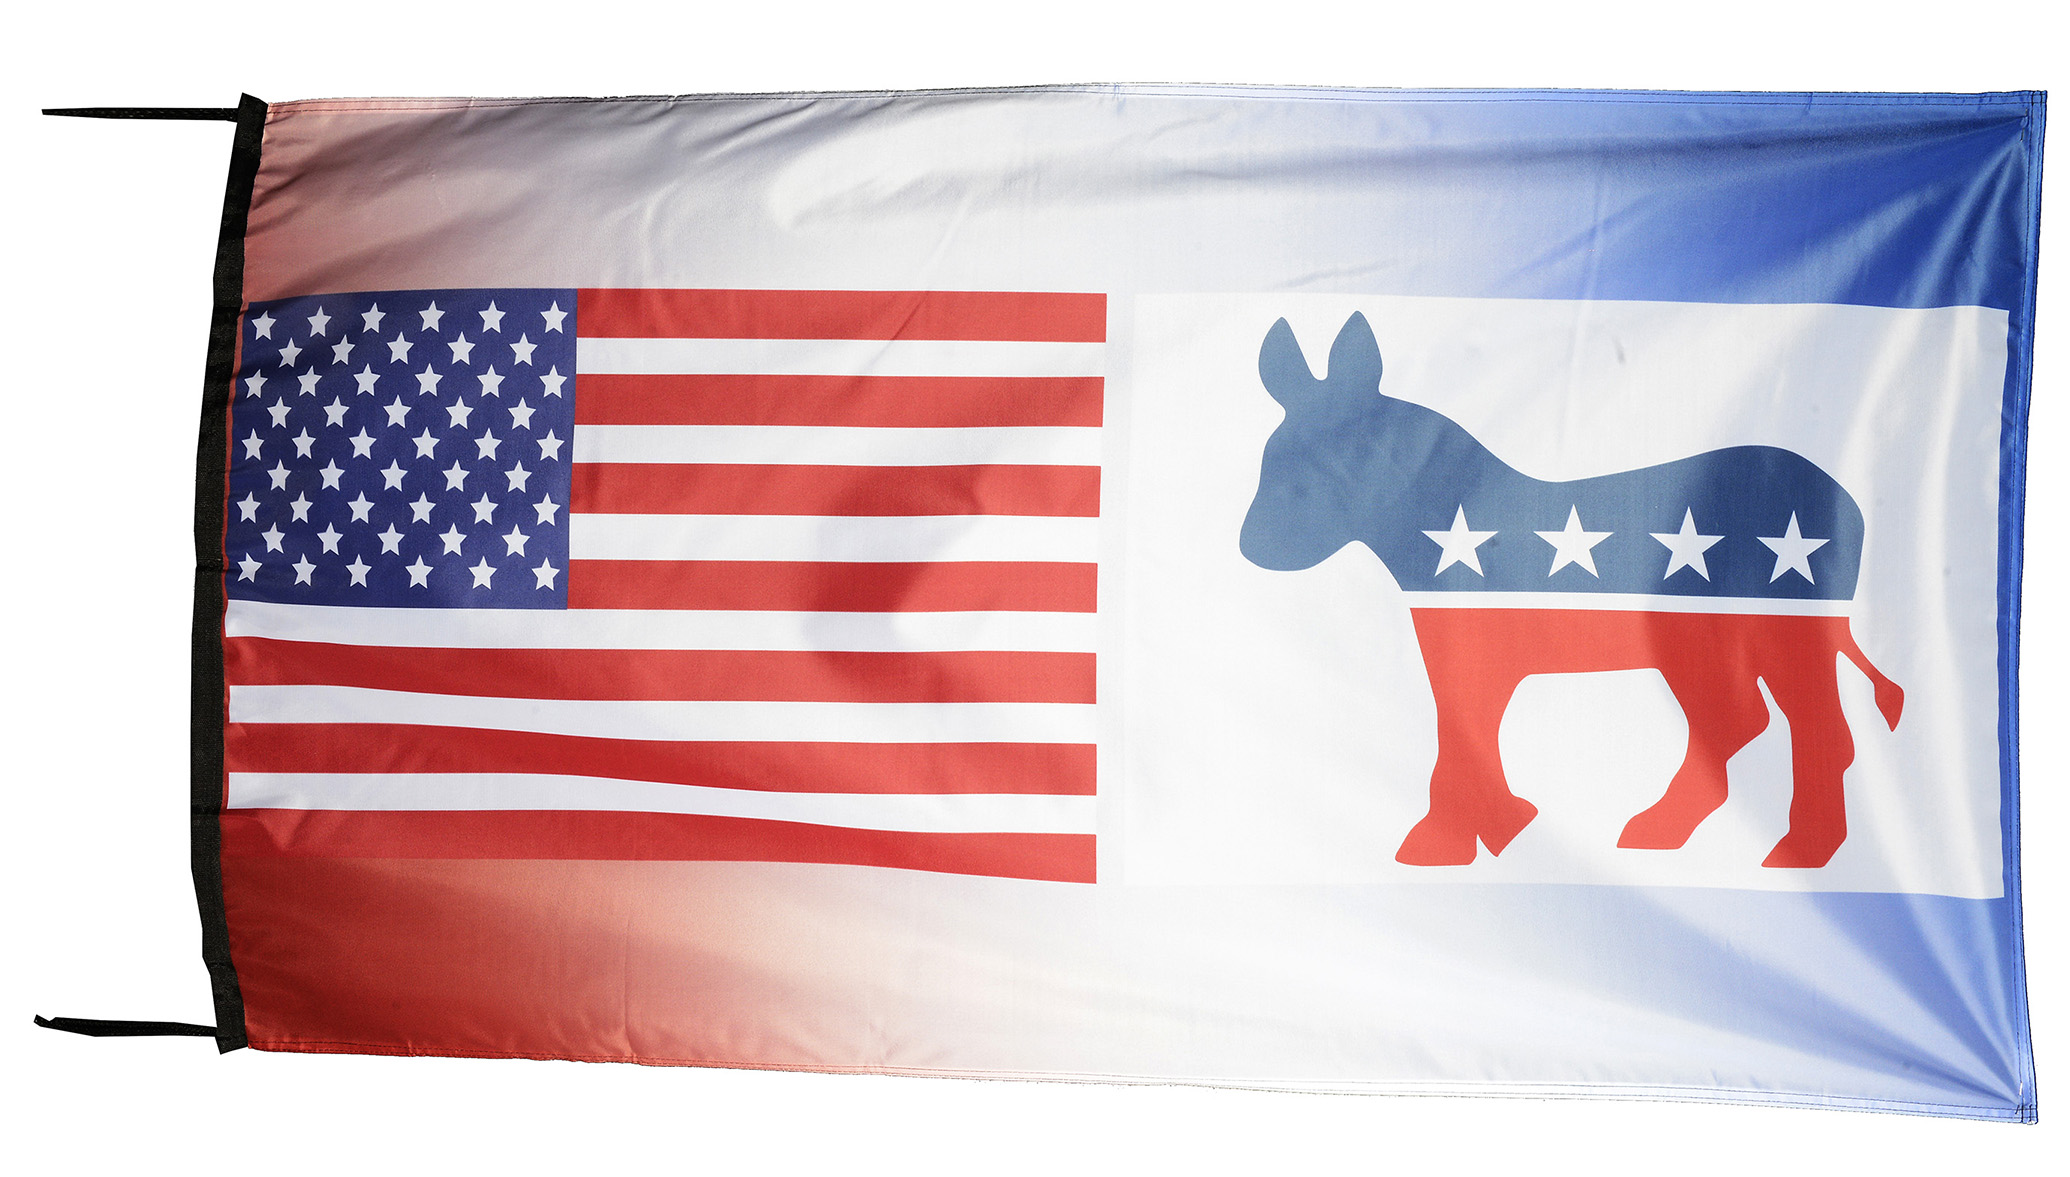 Flag  079 USA / US Country / United States Of America and Democrats Party / Senators / Congress / Washington / White House / Capitol / Politics / Presidential / Elections / Washington / Pride Hybrid Weather-Resistant Polyester Outdoor Flag Landscape Banner / Vivid Colors / 3 X 5 FT (150 x 90cm) International Flags for Sale